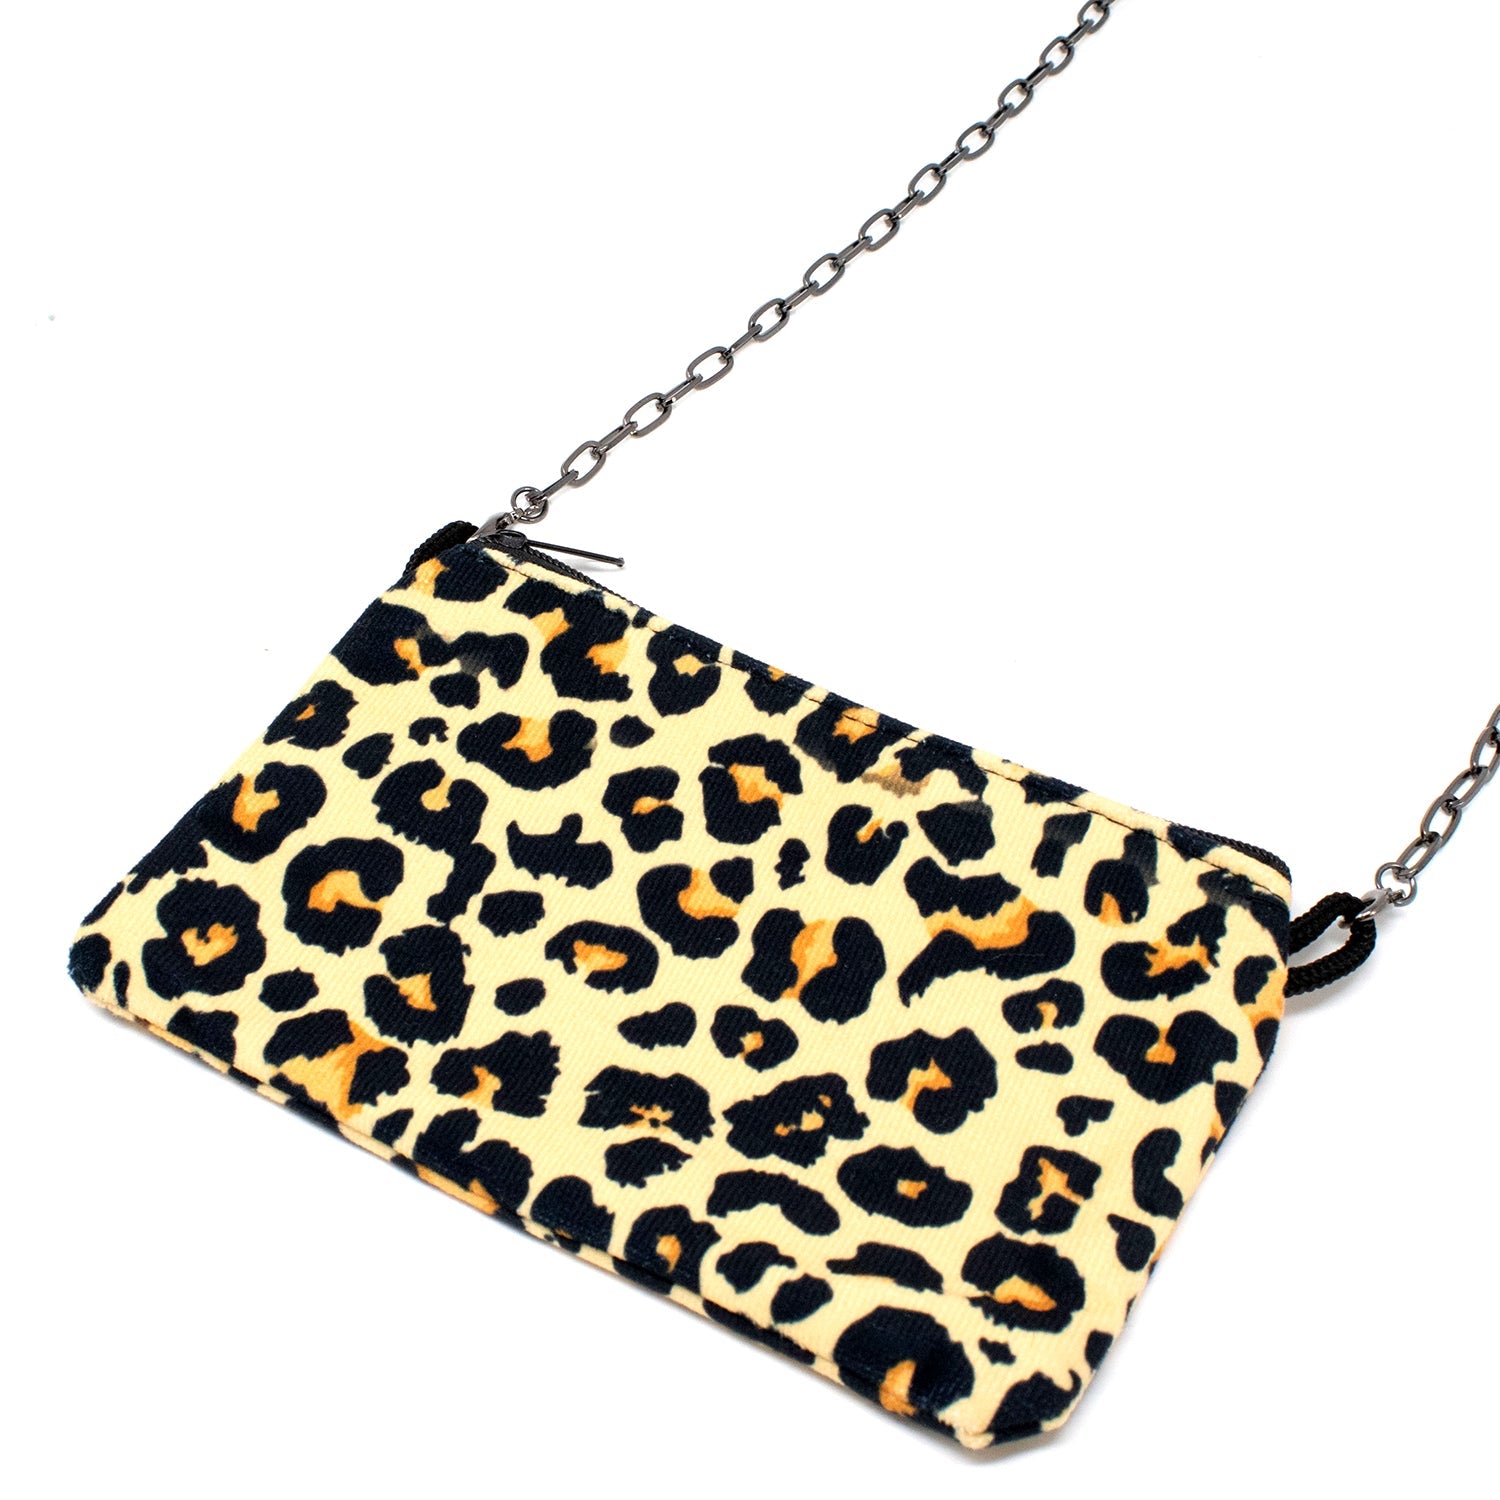 Mask Pouch and Lanyards holds your mask in a safe, enclosed pouch you can easily hang around your neck. Great for work, home, jogging, cleaning - any place you need your mask out of they way. Leopard skin pouch with silver chain.